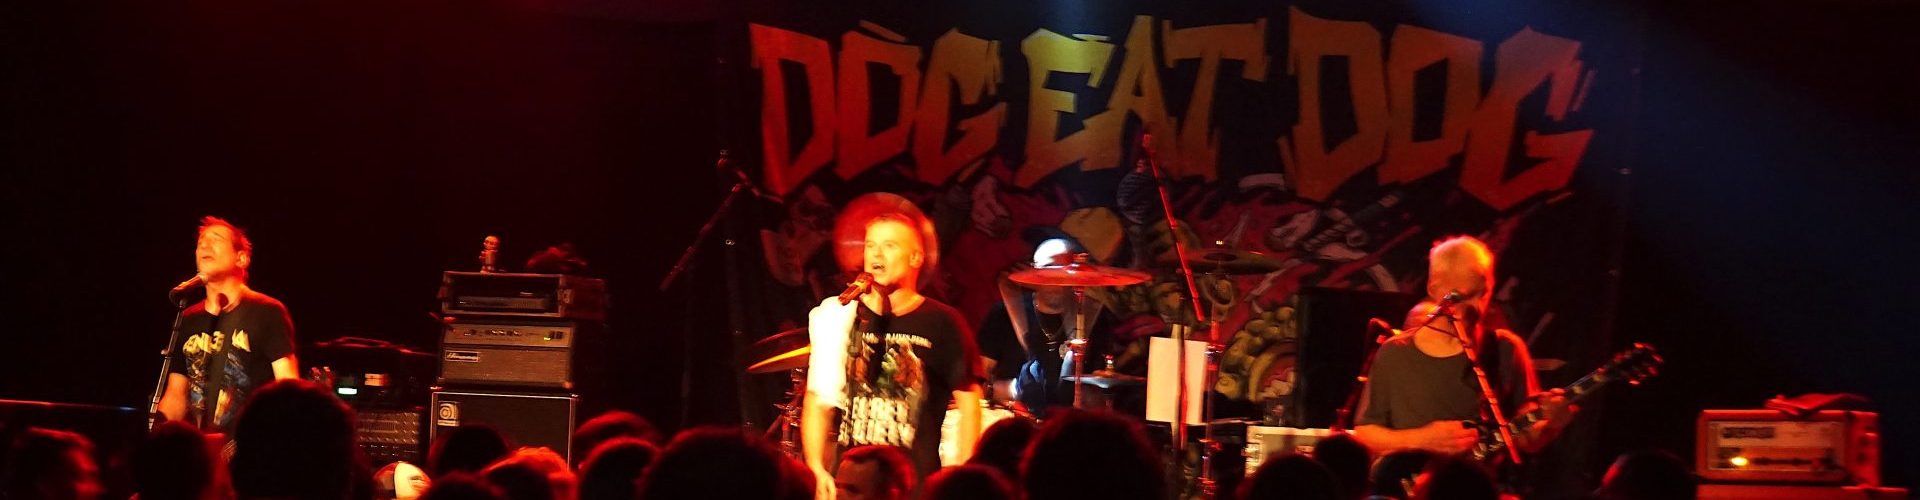 FOTOSTRECKE: DOG EAT DOG Special Guests: Grove Street, Kings Never Die